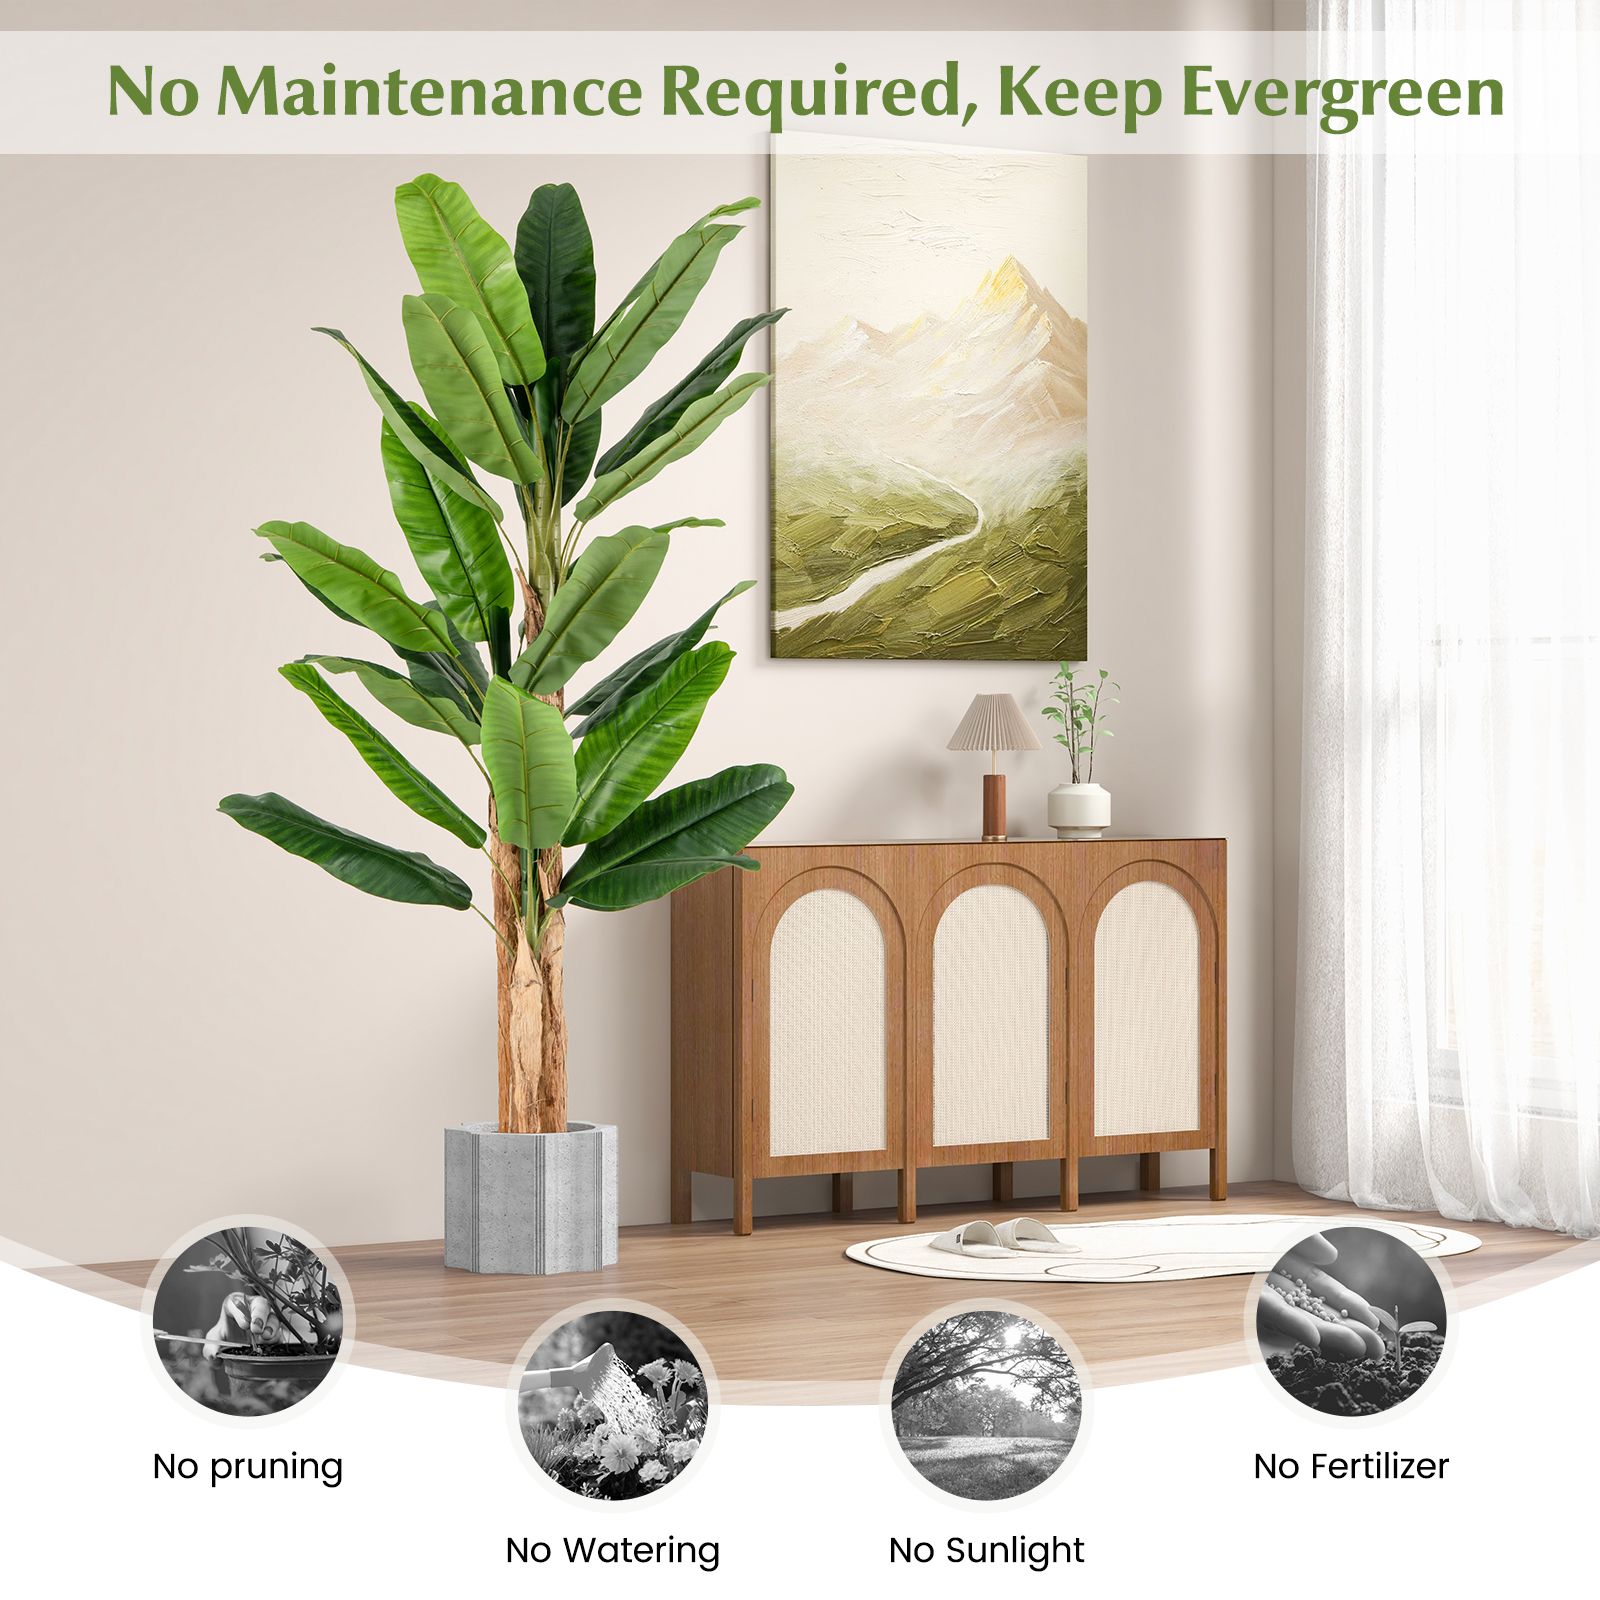 195cm Tall Artificial Banana Tree with 27 Large Leaves